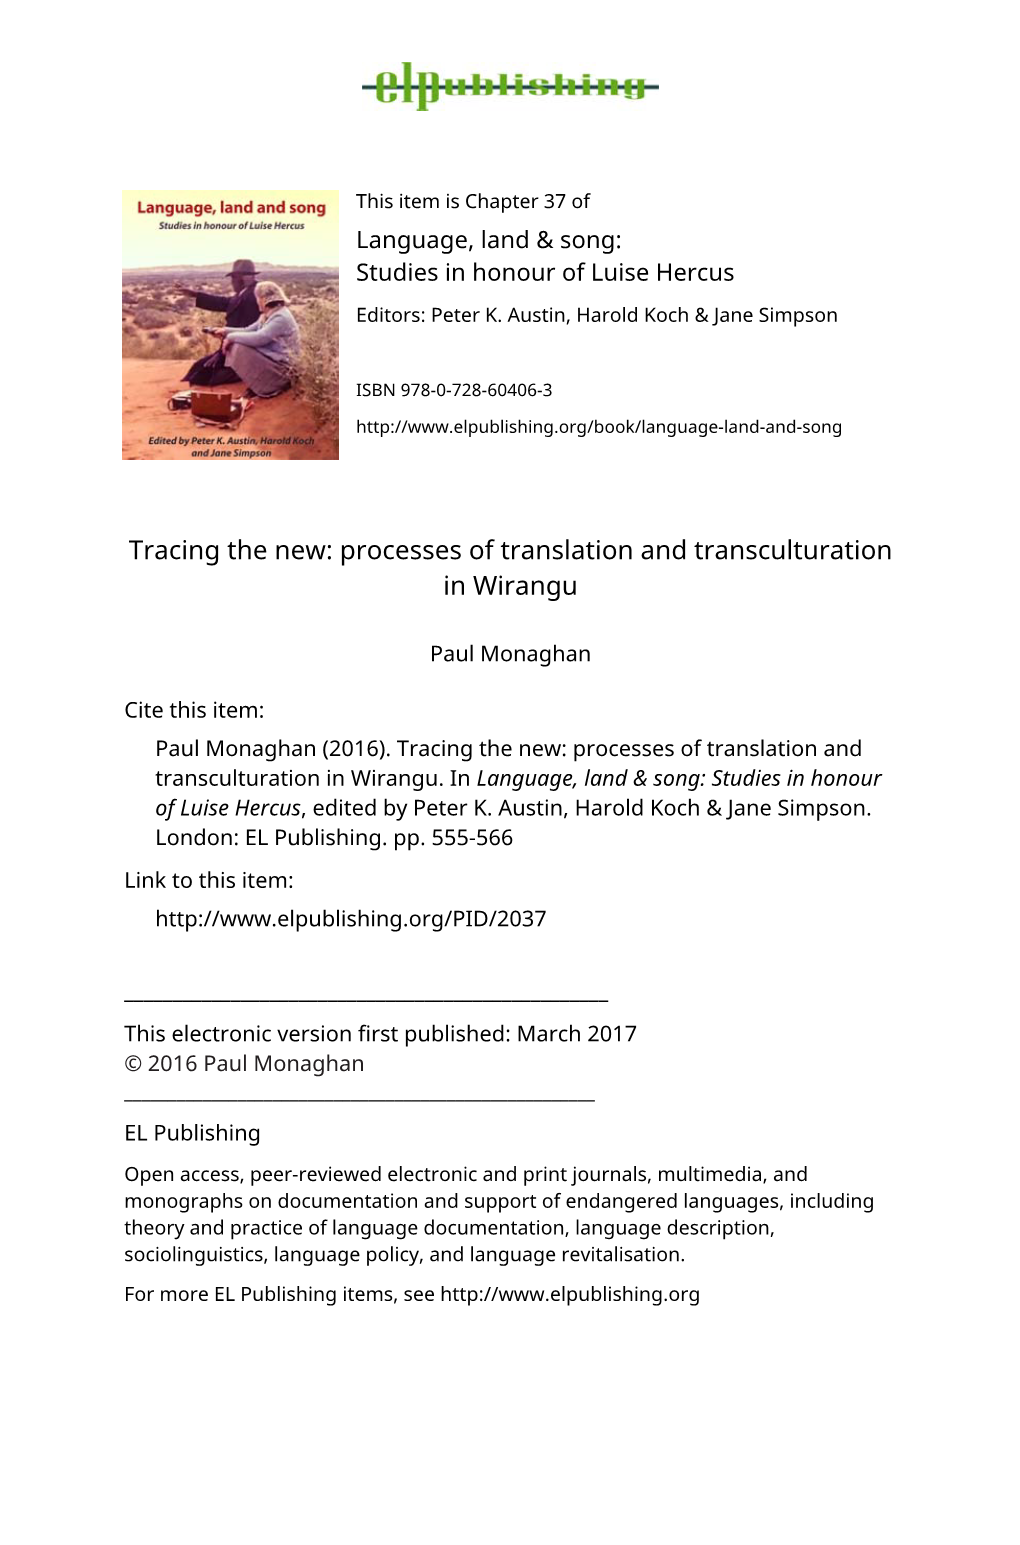 Processes of Translation and Transculturation in Wirangu